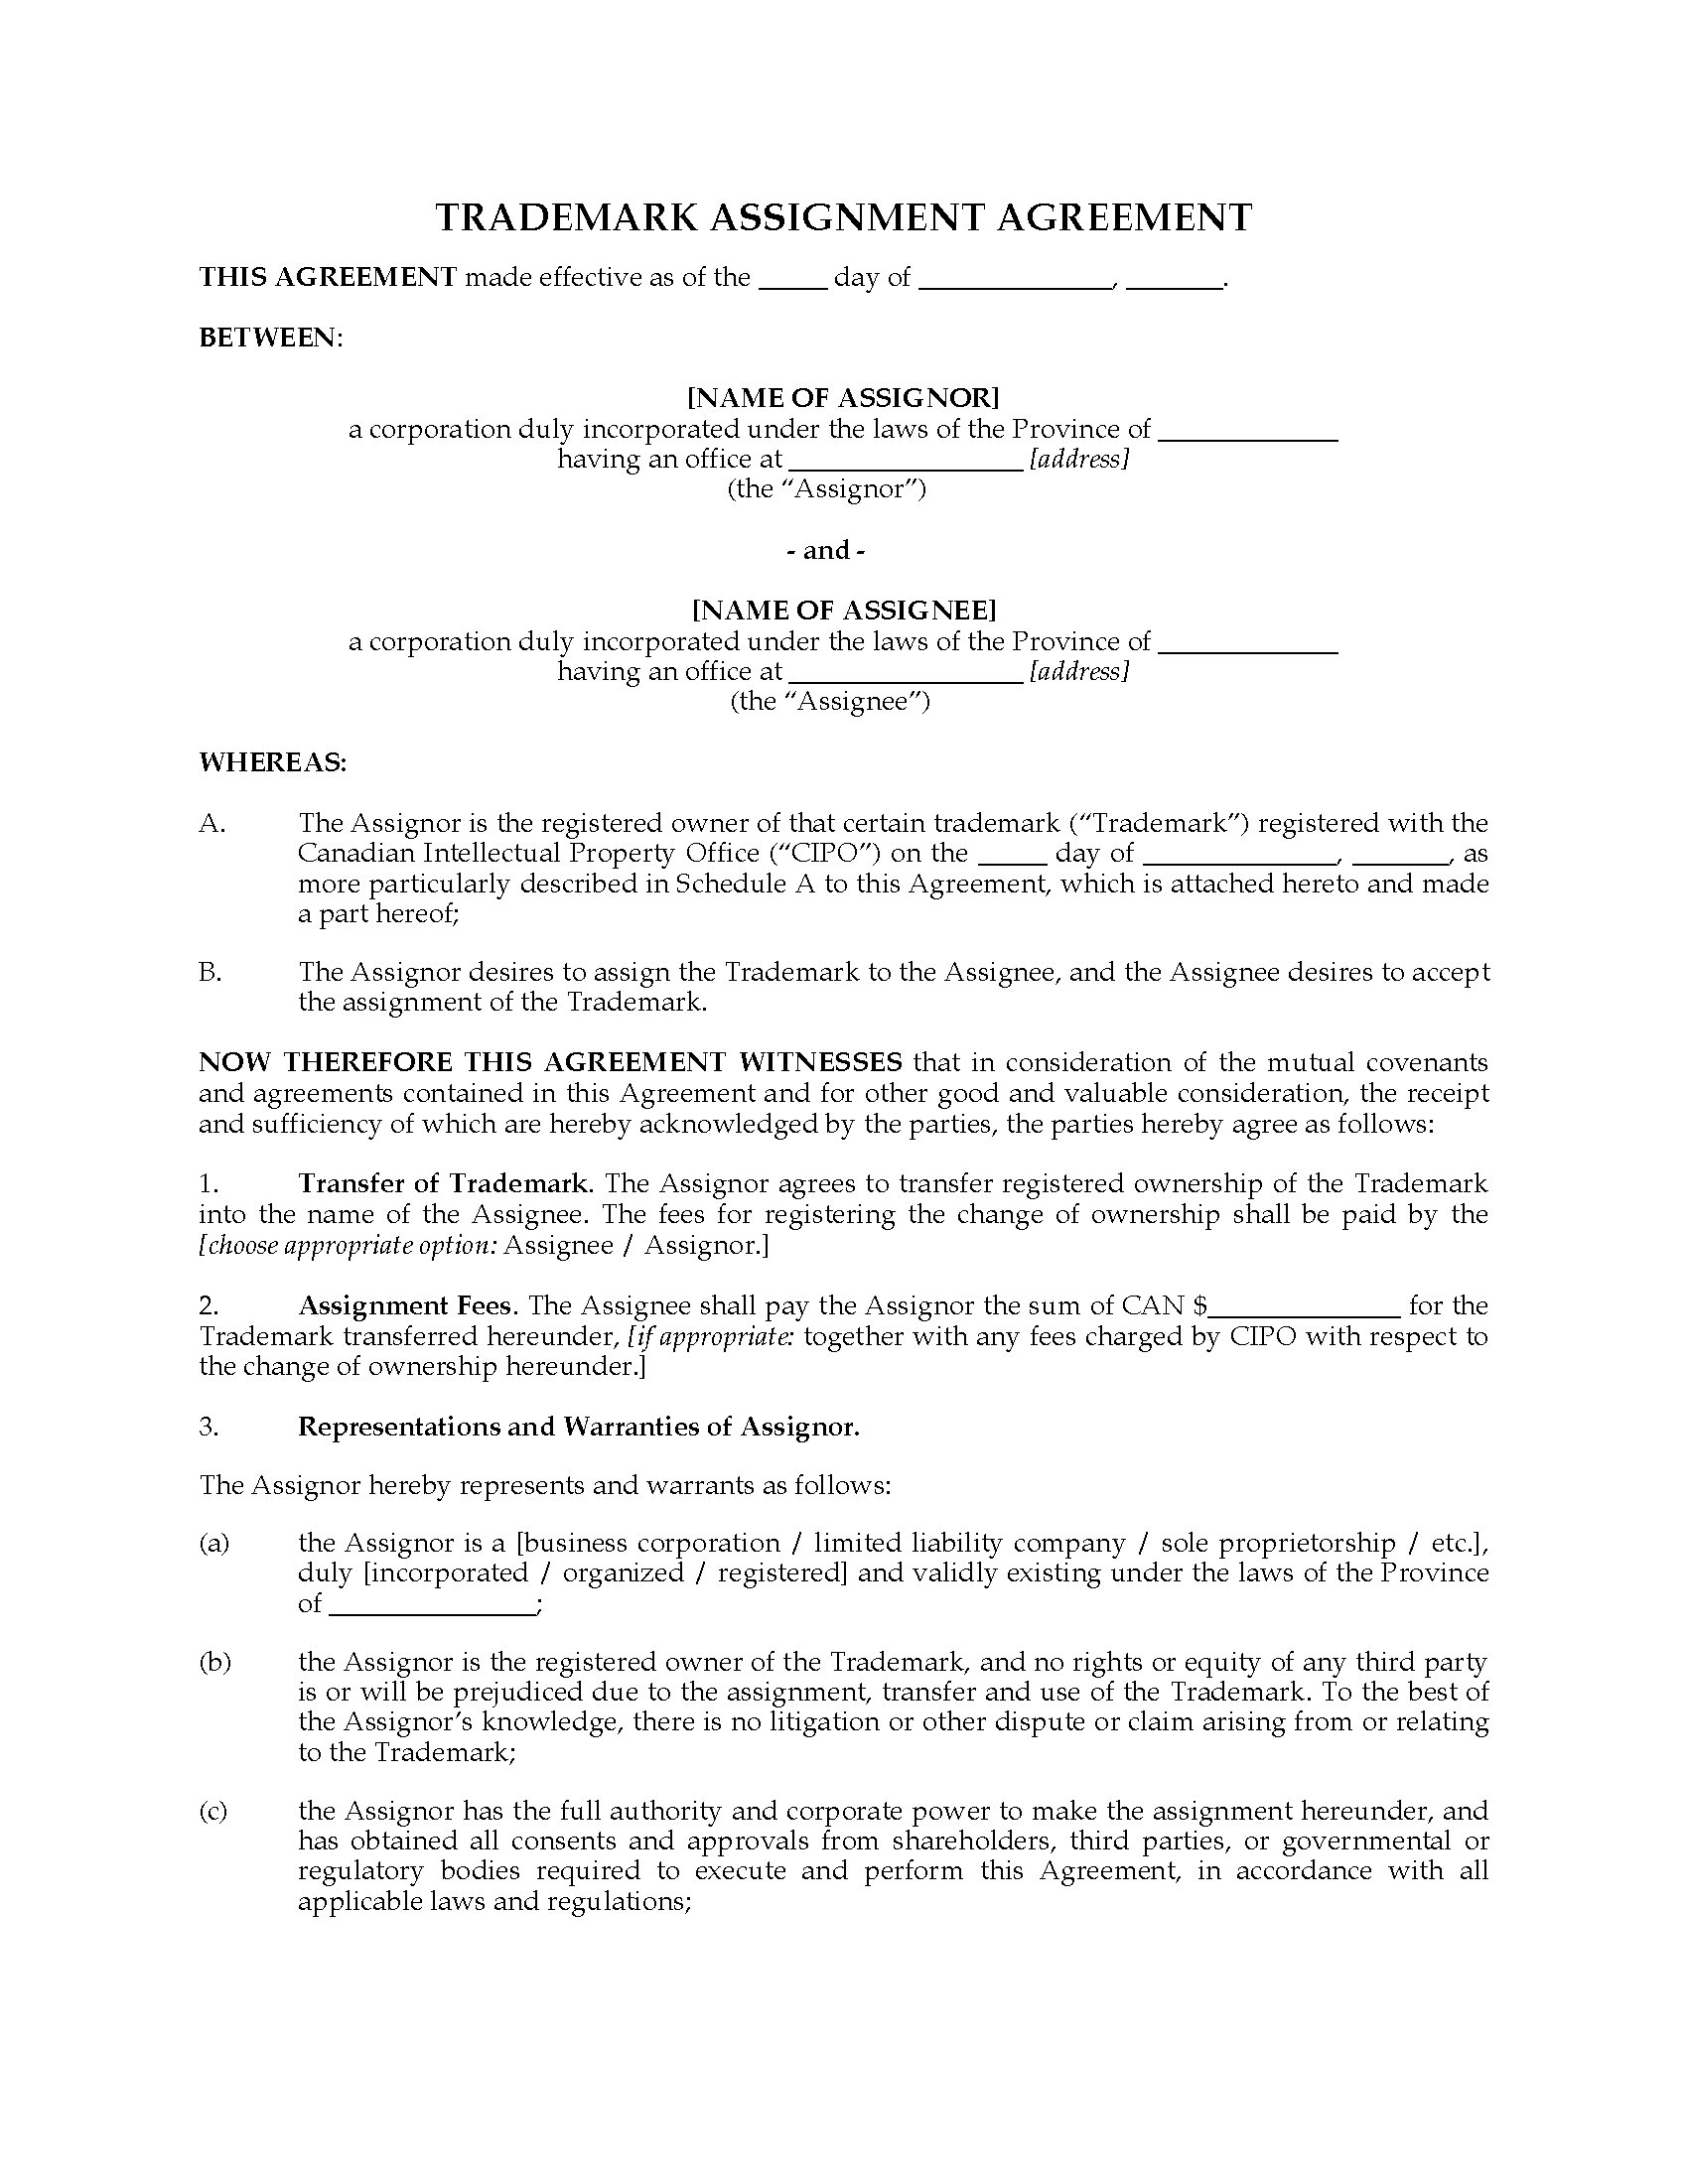 Canada Trade Mark Assignment Agreement  Legal Forms and Business In trademark assignment agreement template